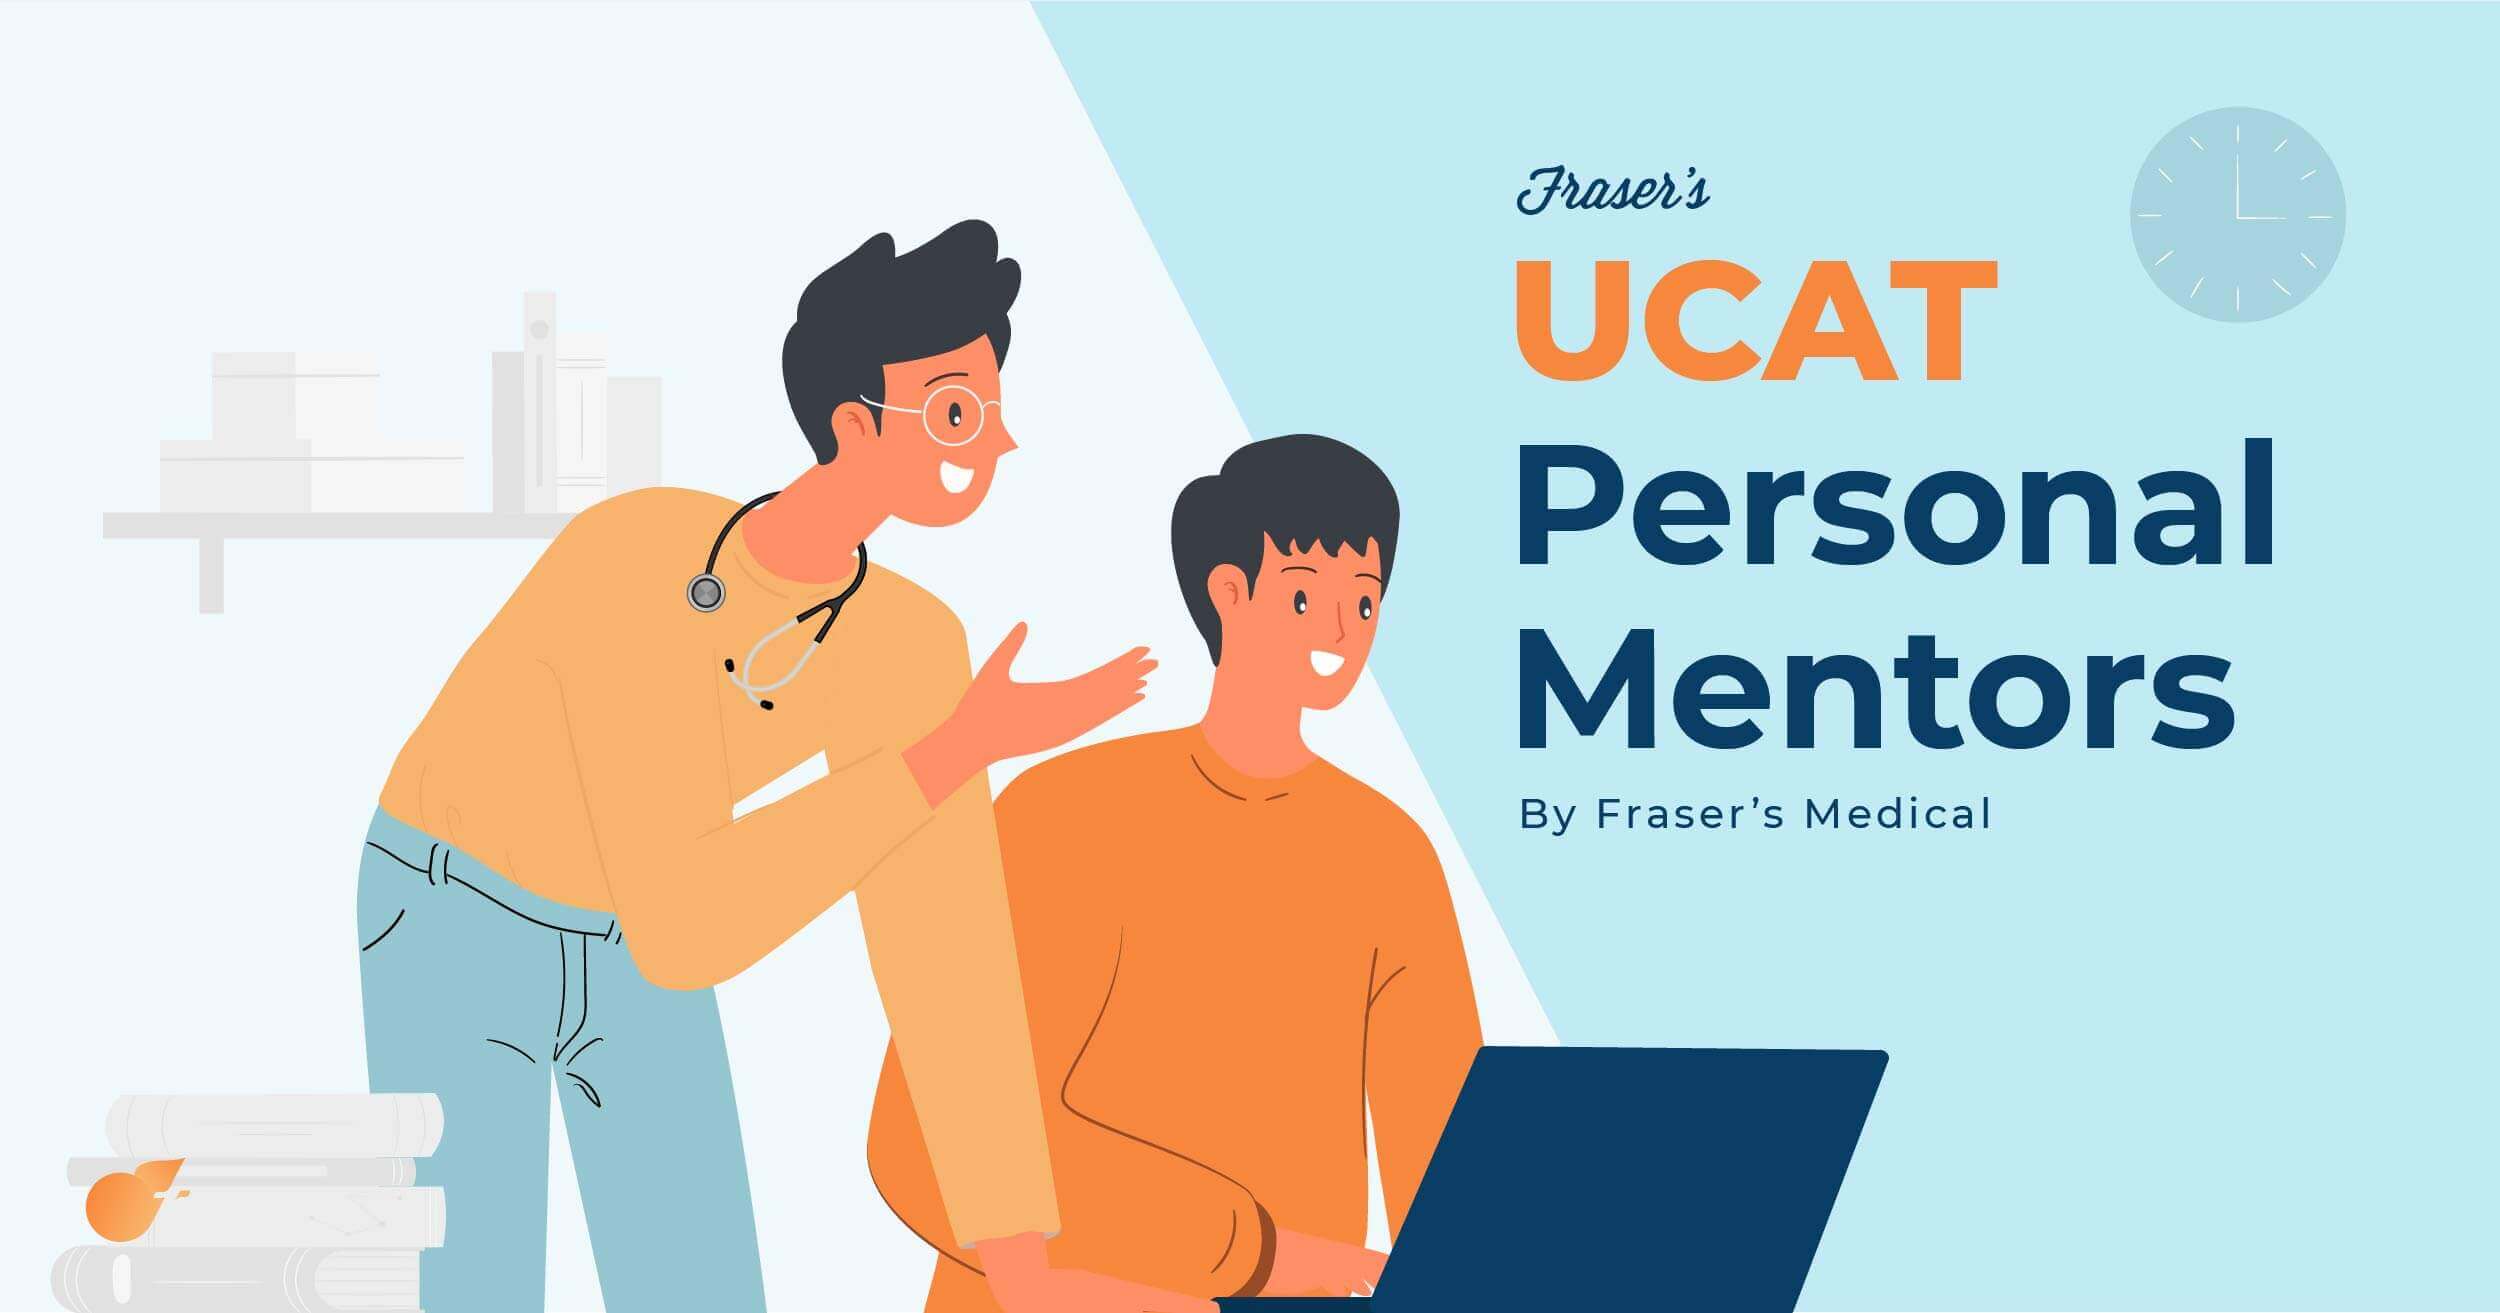 Fraser’s UCAT Personal Mentors: How they guide you in your UCAT Prep featured image